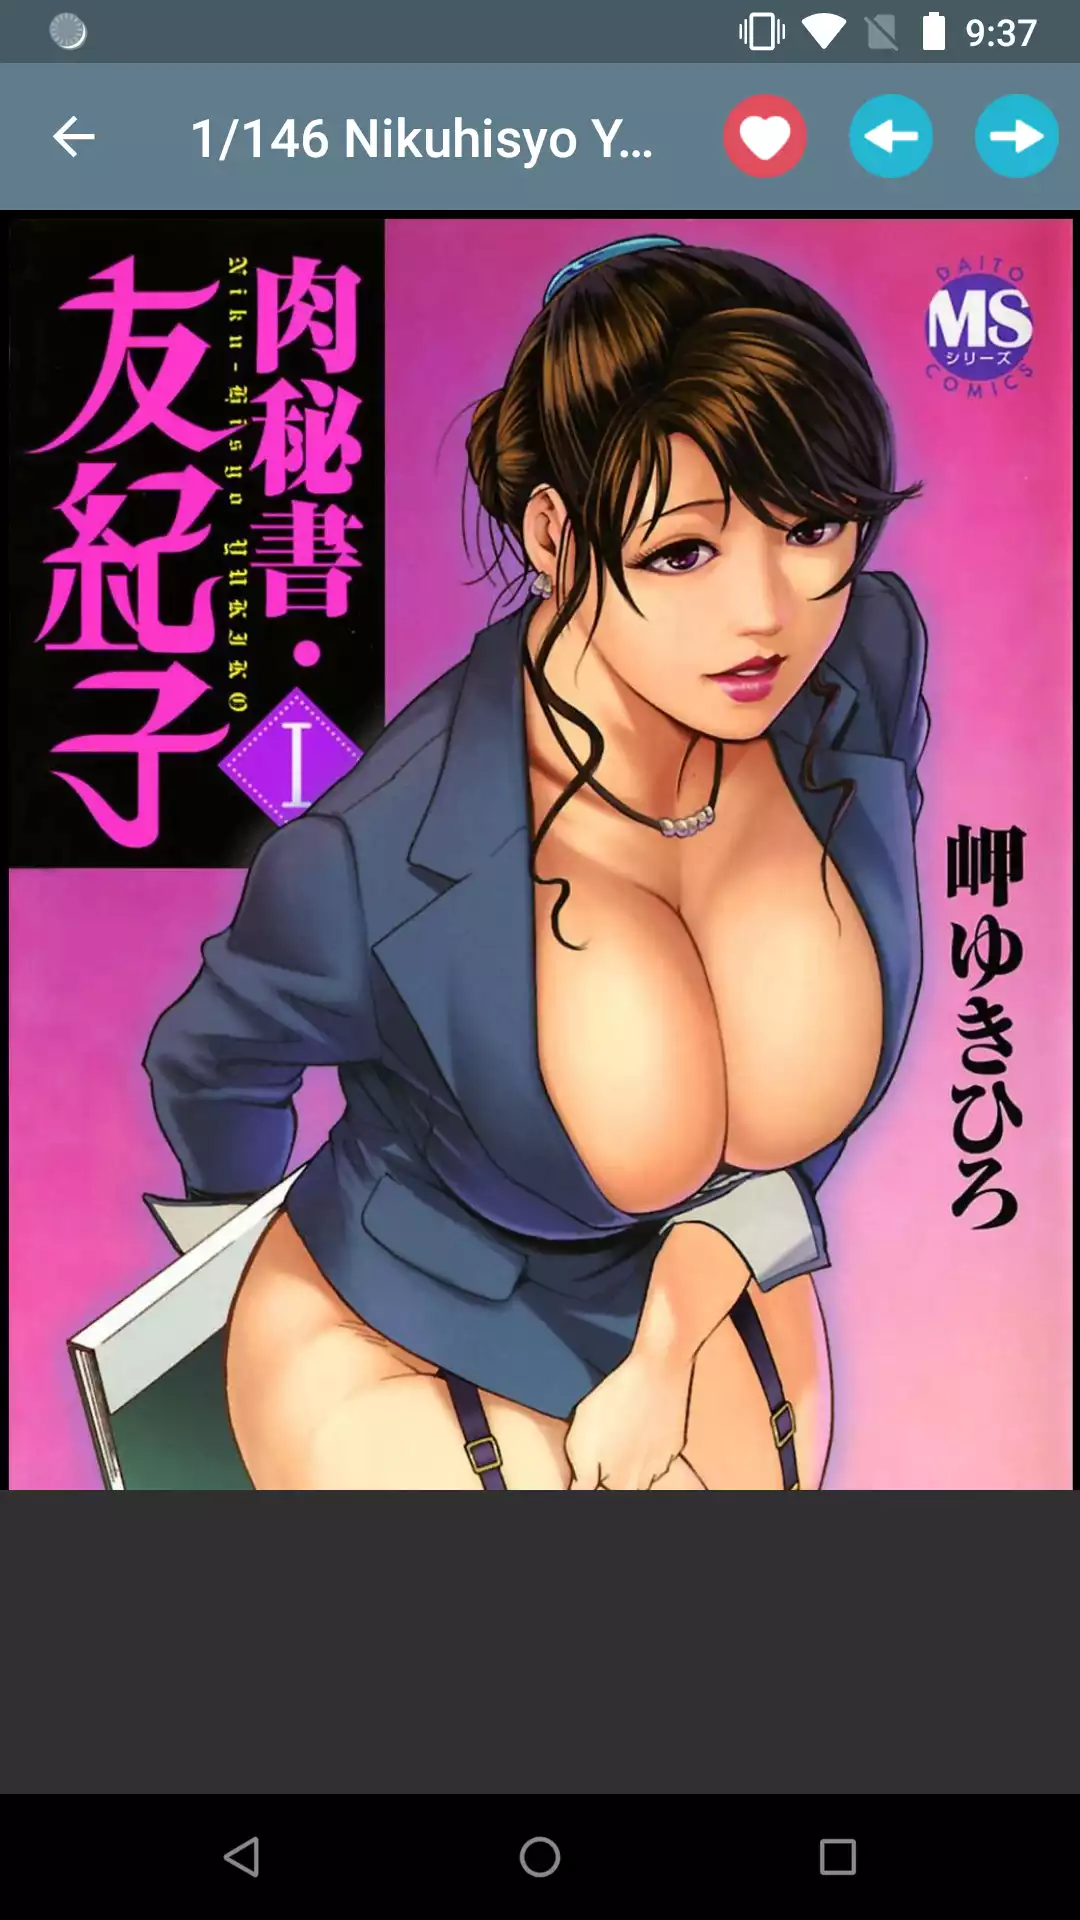 Nikuhisyo Yukiko application,download,star,porn,henti,app,femdom,pegging,search,erotic,gallery,sexy,apps,japan,pics,tits,hentai,for,comic,android,big,pornstar,images,comics